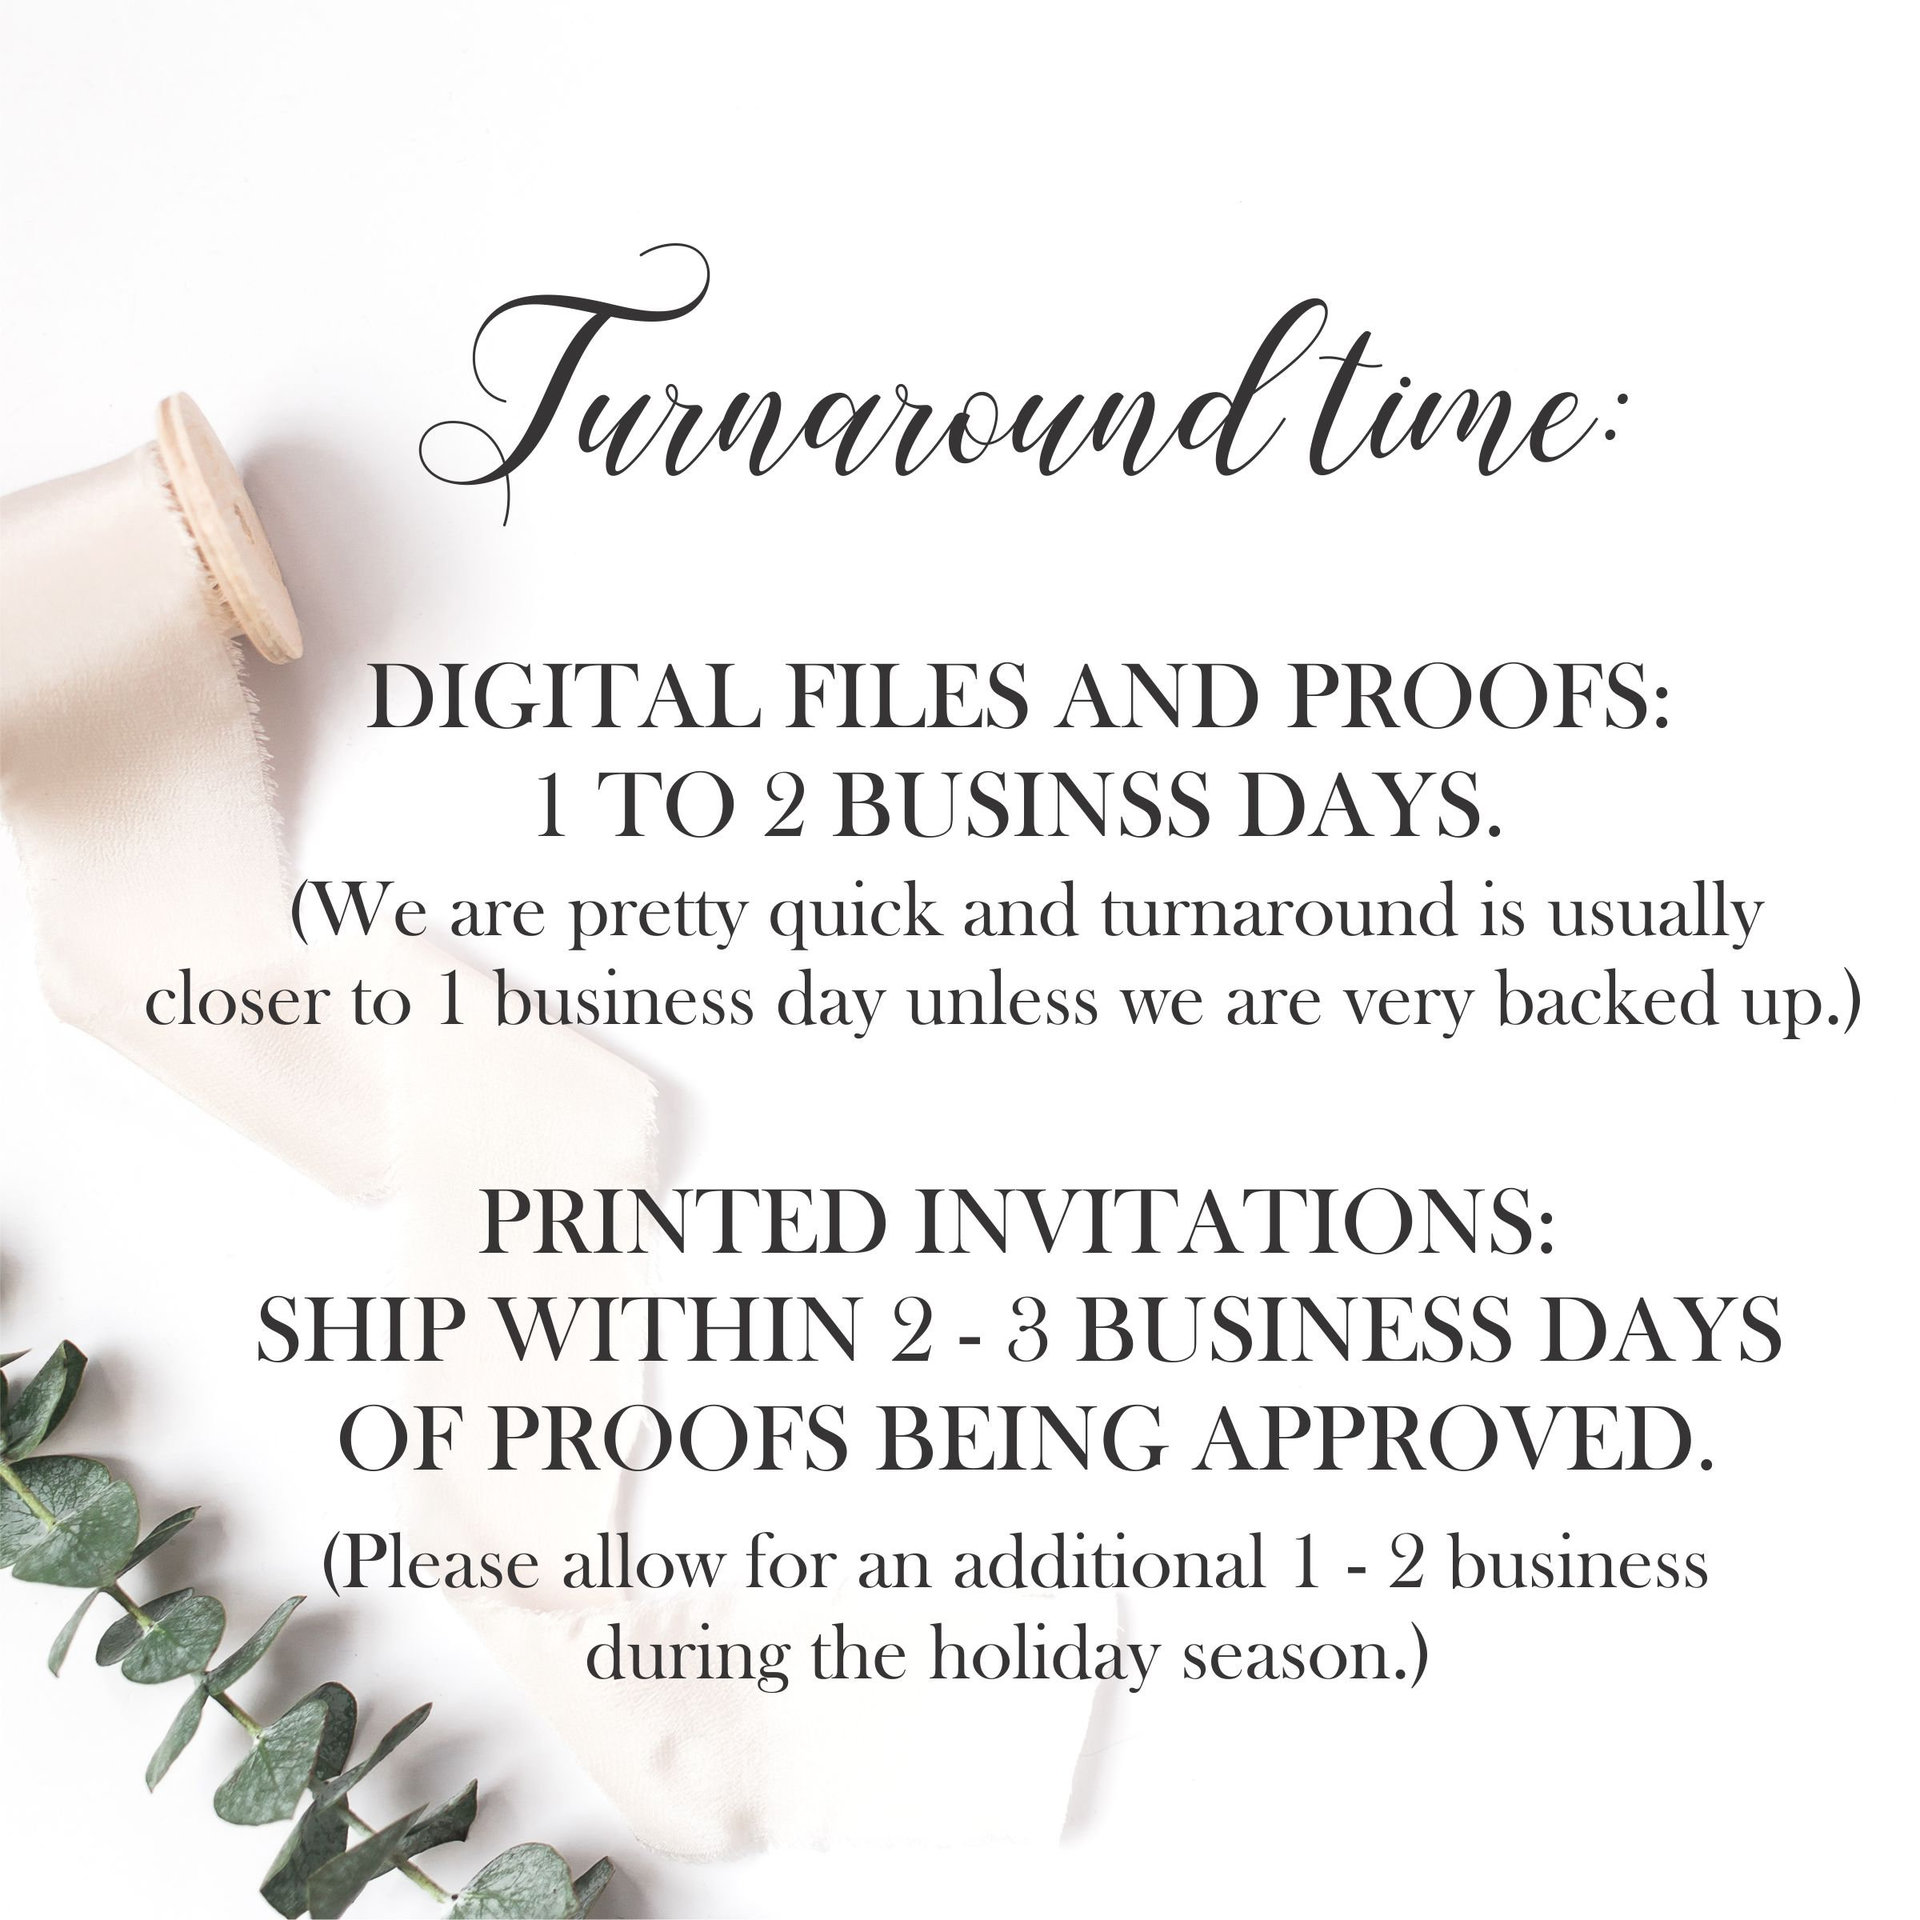 Winter Bridal Shower Invitation, Rustic Pine Trees and Fairy Lights